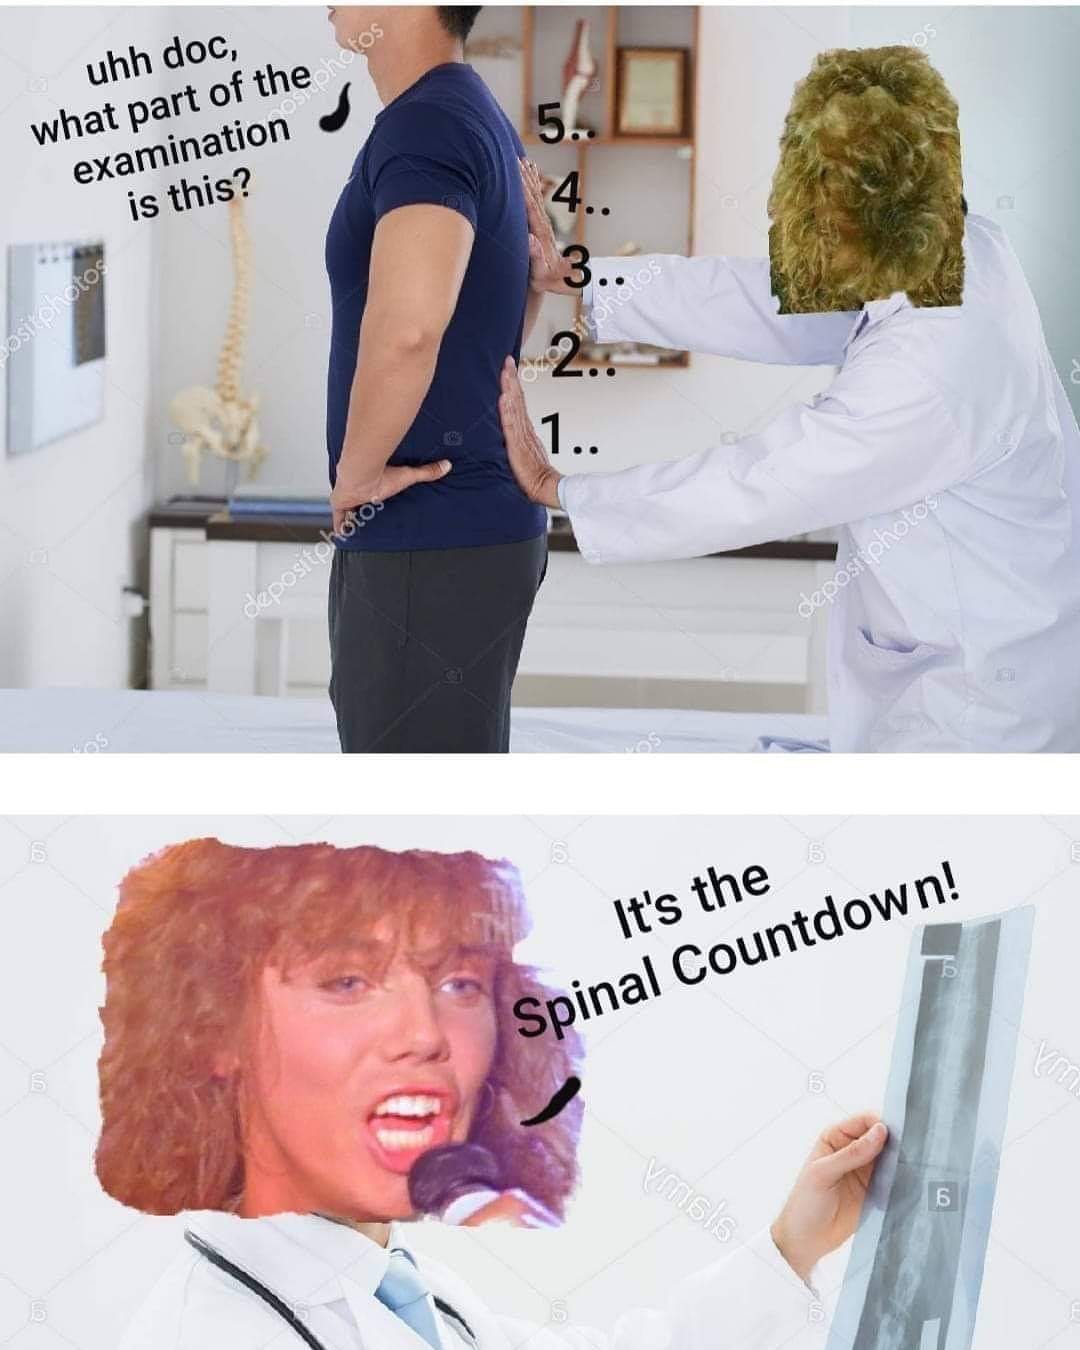 it's the final countdown meme - uhh doc, what part of the examination is this? Lositphotos depositphoto. depositphotos It's the Spinal Countdown! vmslo